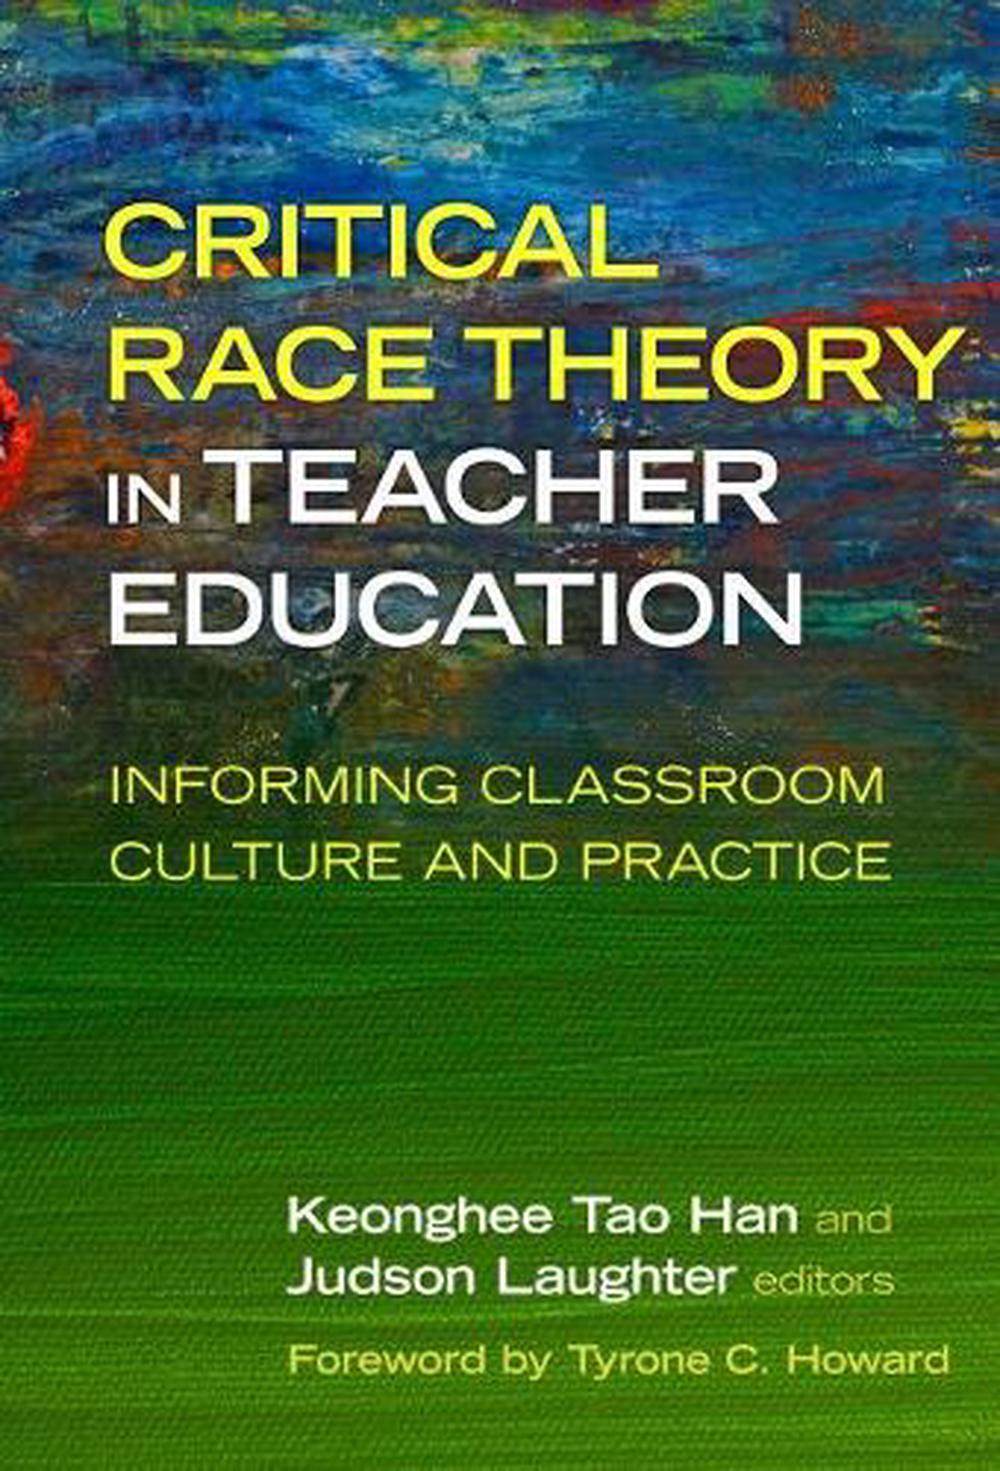 critical race theory in education pdf